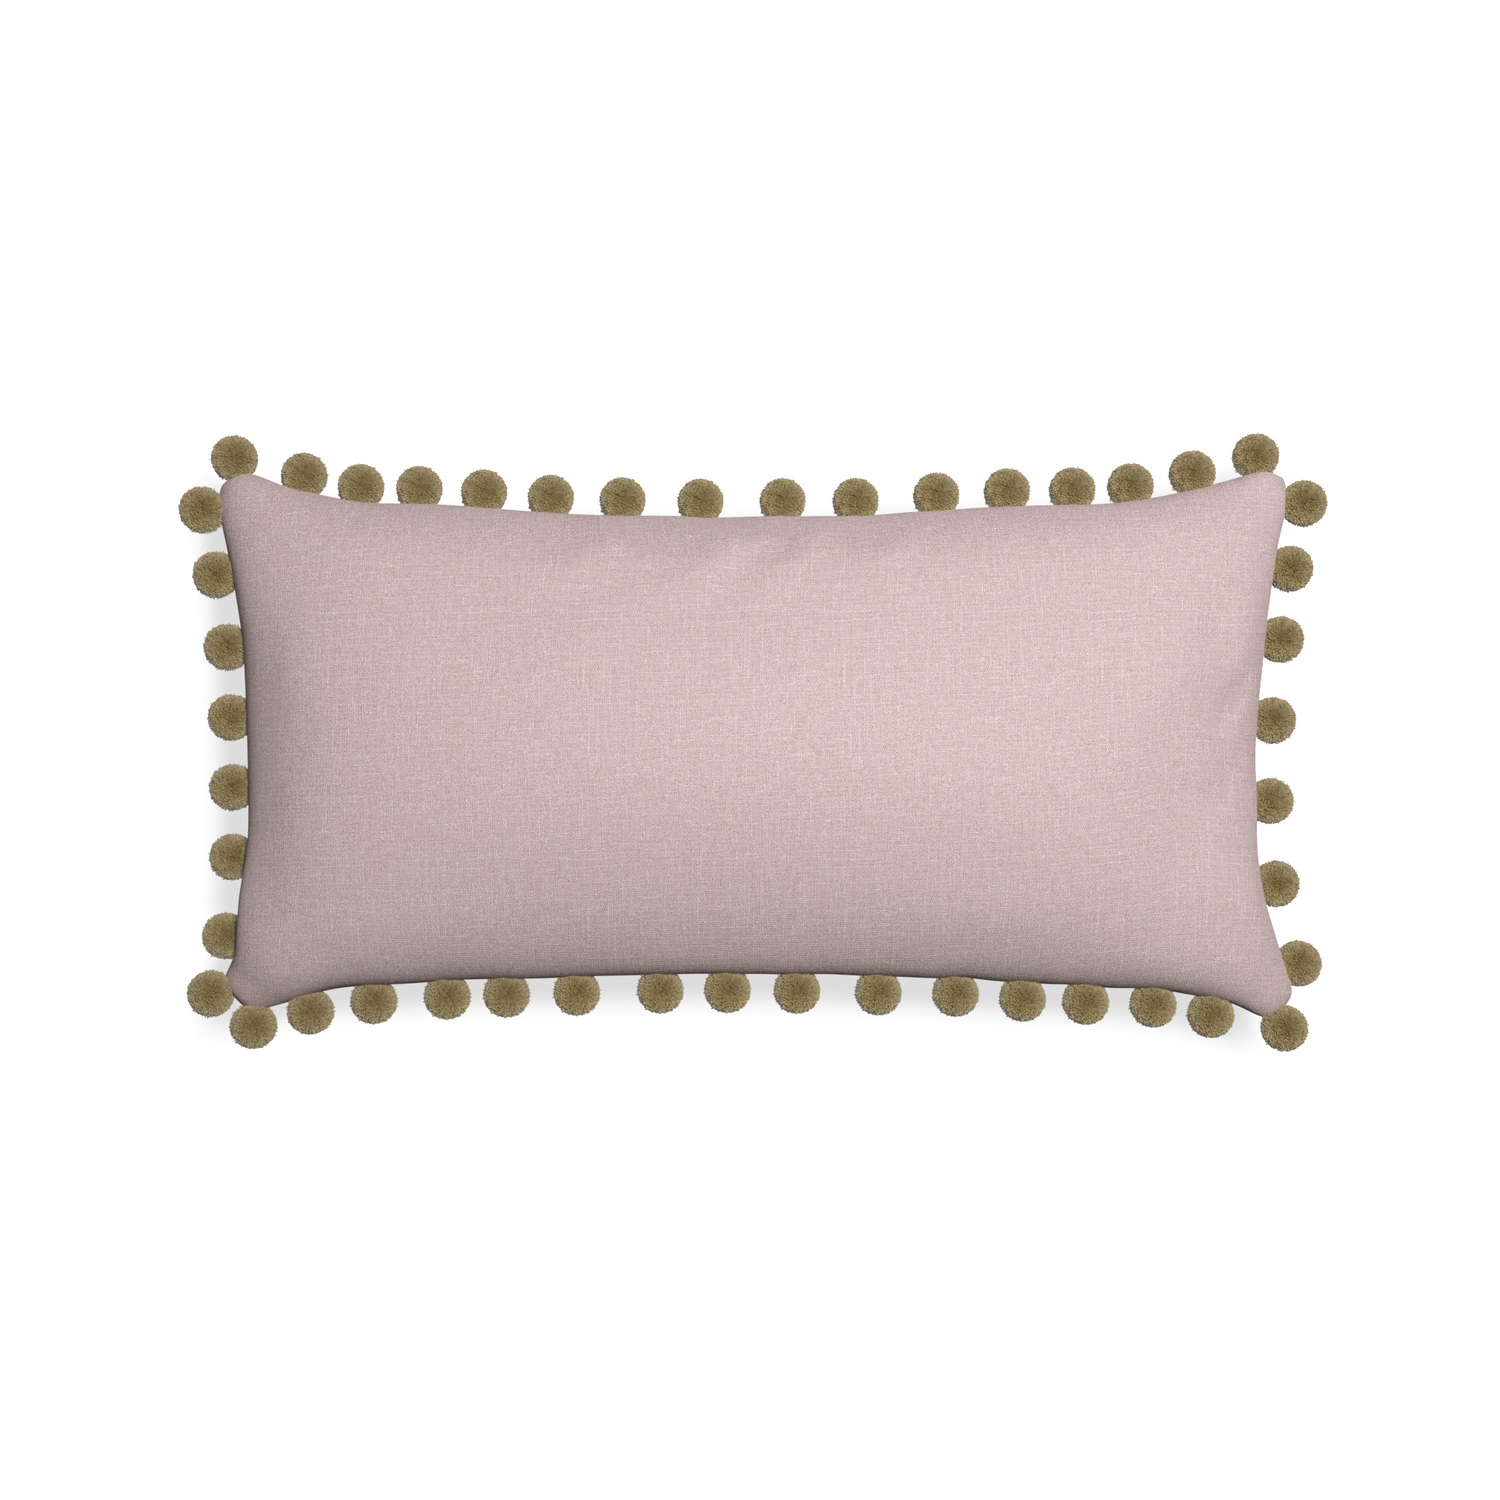 Midi-lumbar orchid custom mauve pinkpillow with olive pom pom on white background